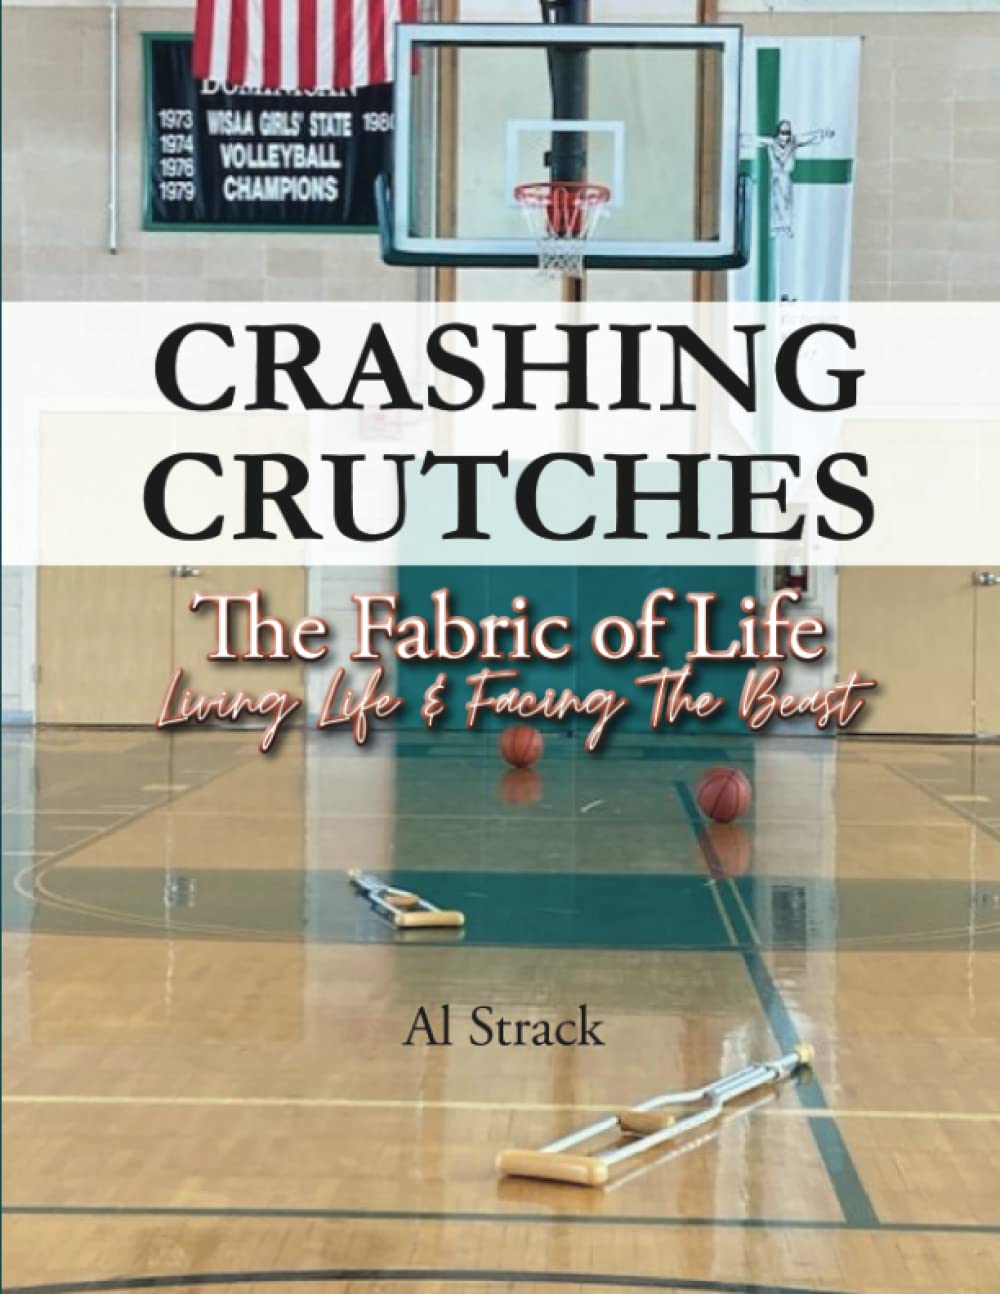 Alan Stark’s Debut Book Crashing Crutches: The Fabric of Life's Journeys Reveals Insight Into Inspiring Stories To Overcome Life Challenges